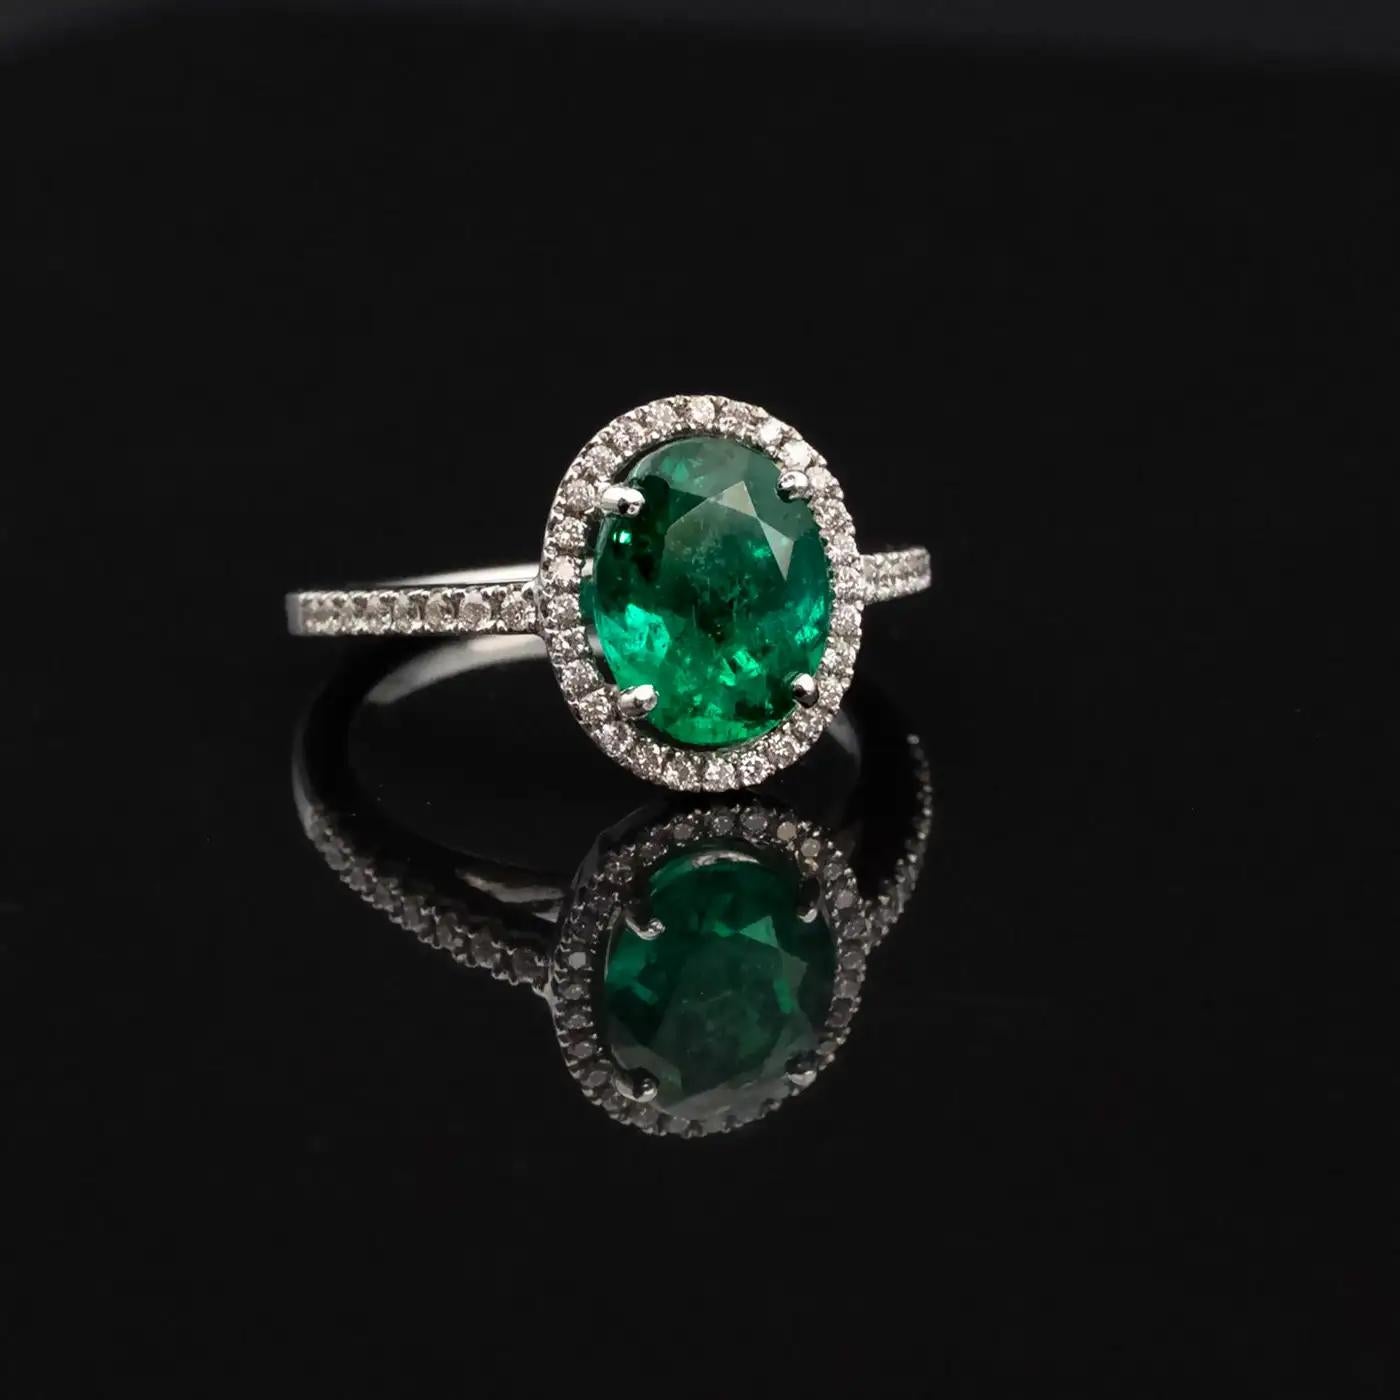 This exquisite engagement ring is a testament to refined elegance, featuring a 1.62ct oval-cut Colombian emerald, renowned for its rich, vivid Muzo green hue. Certified by Bellerophon, a reputable French independent laboratory, this emerald is